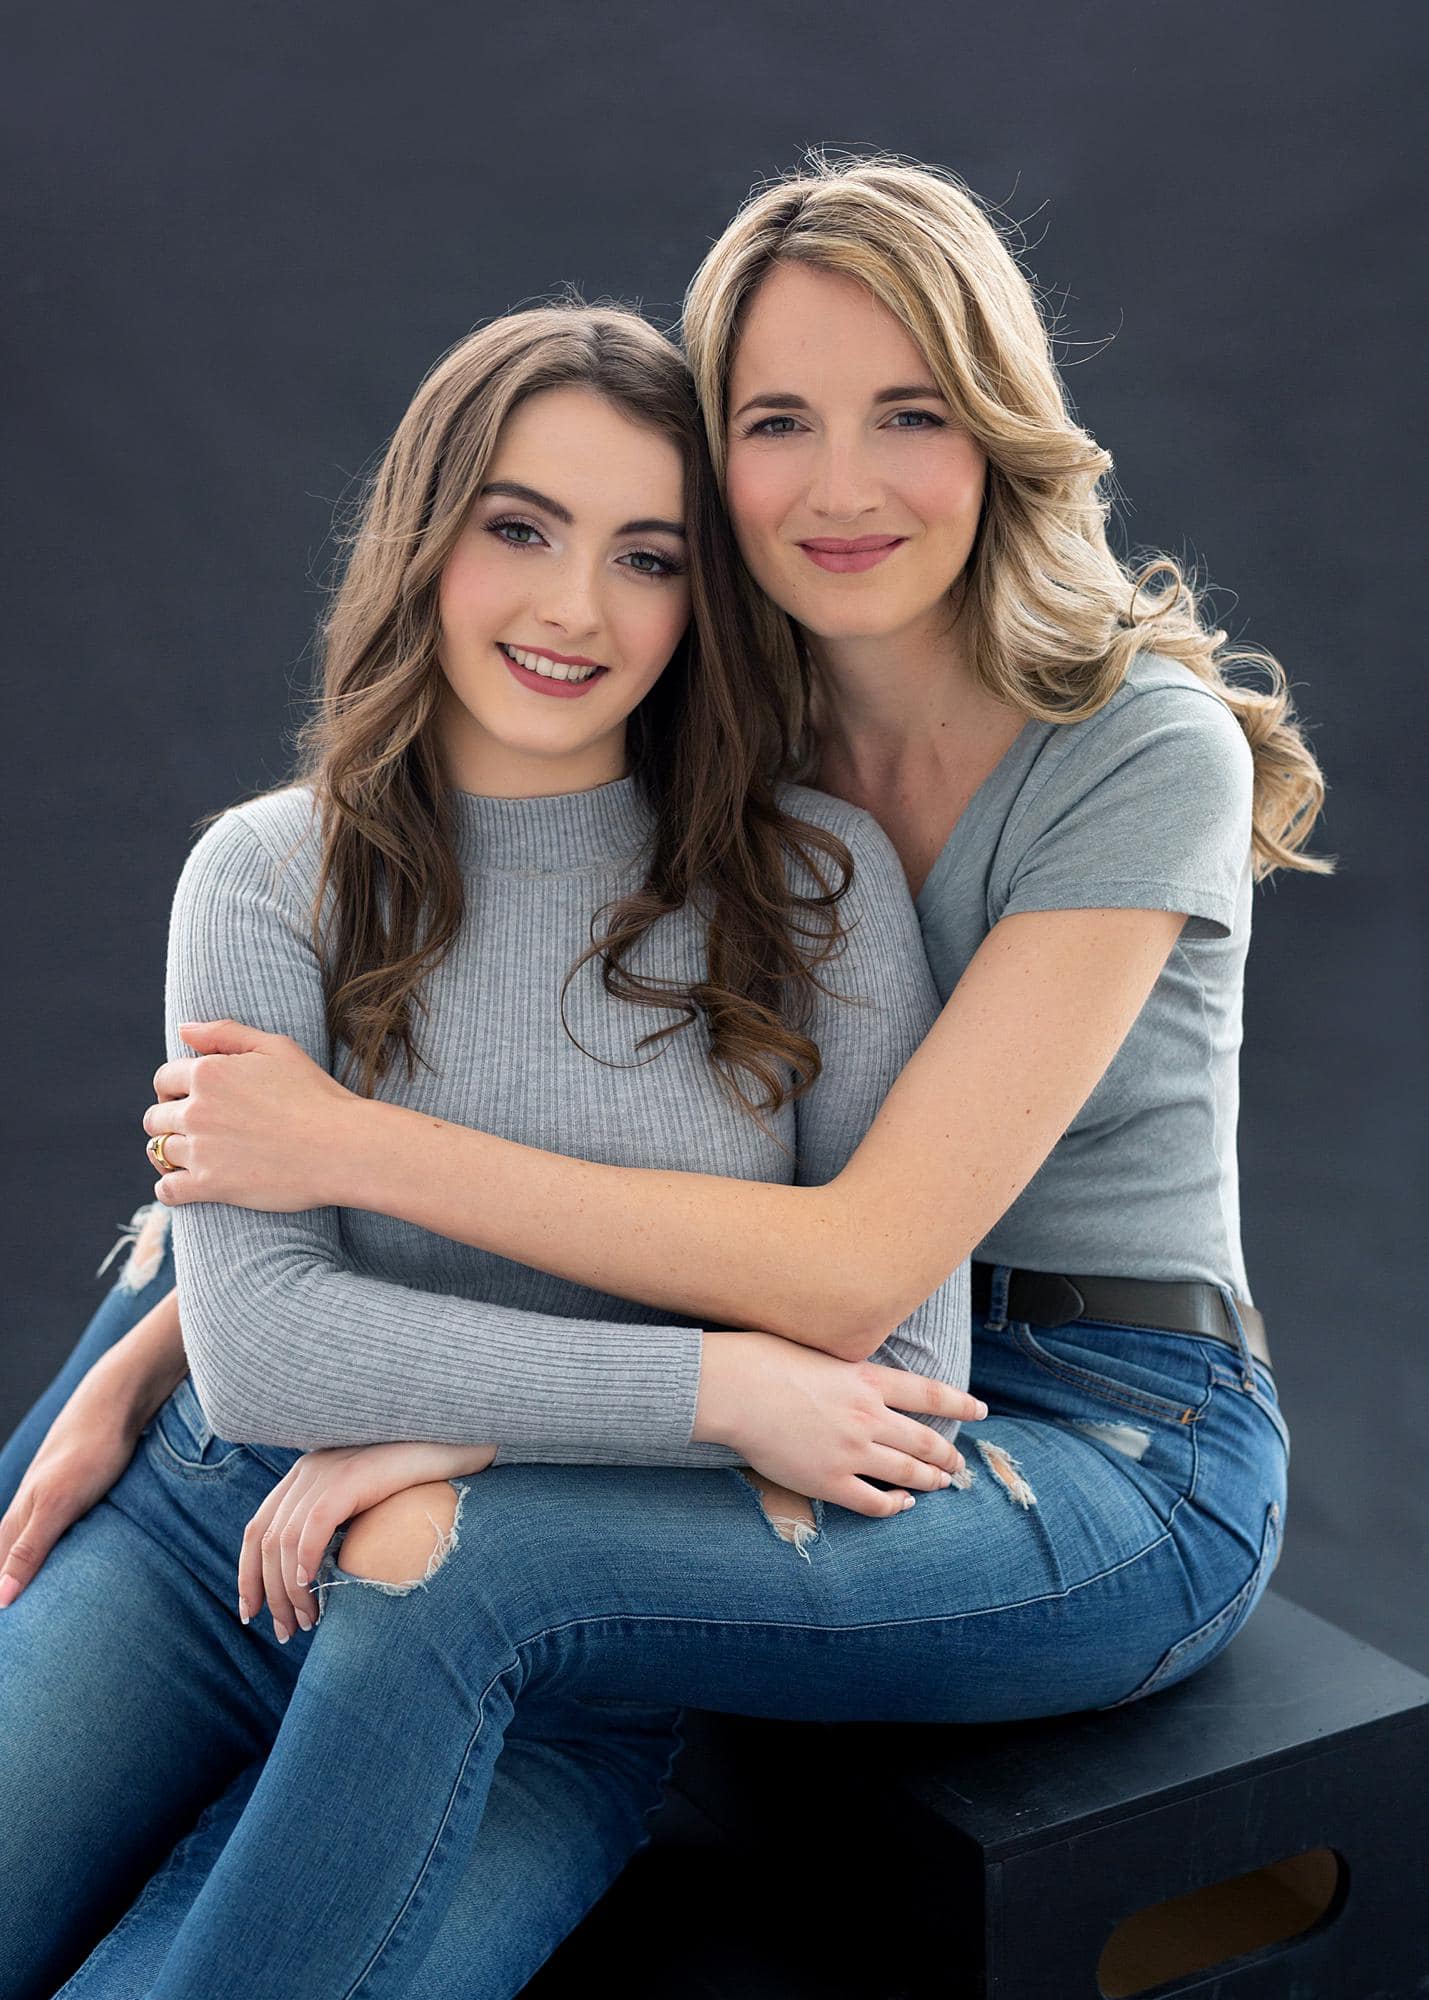 Mother and daughter pose for Beauty Shoot Photoshoot in a Suffolk studio wearing jeans and grey tshirts